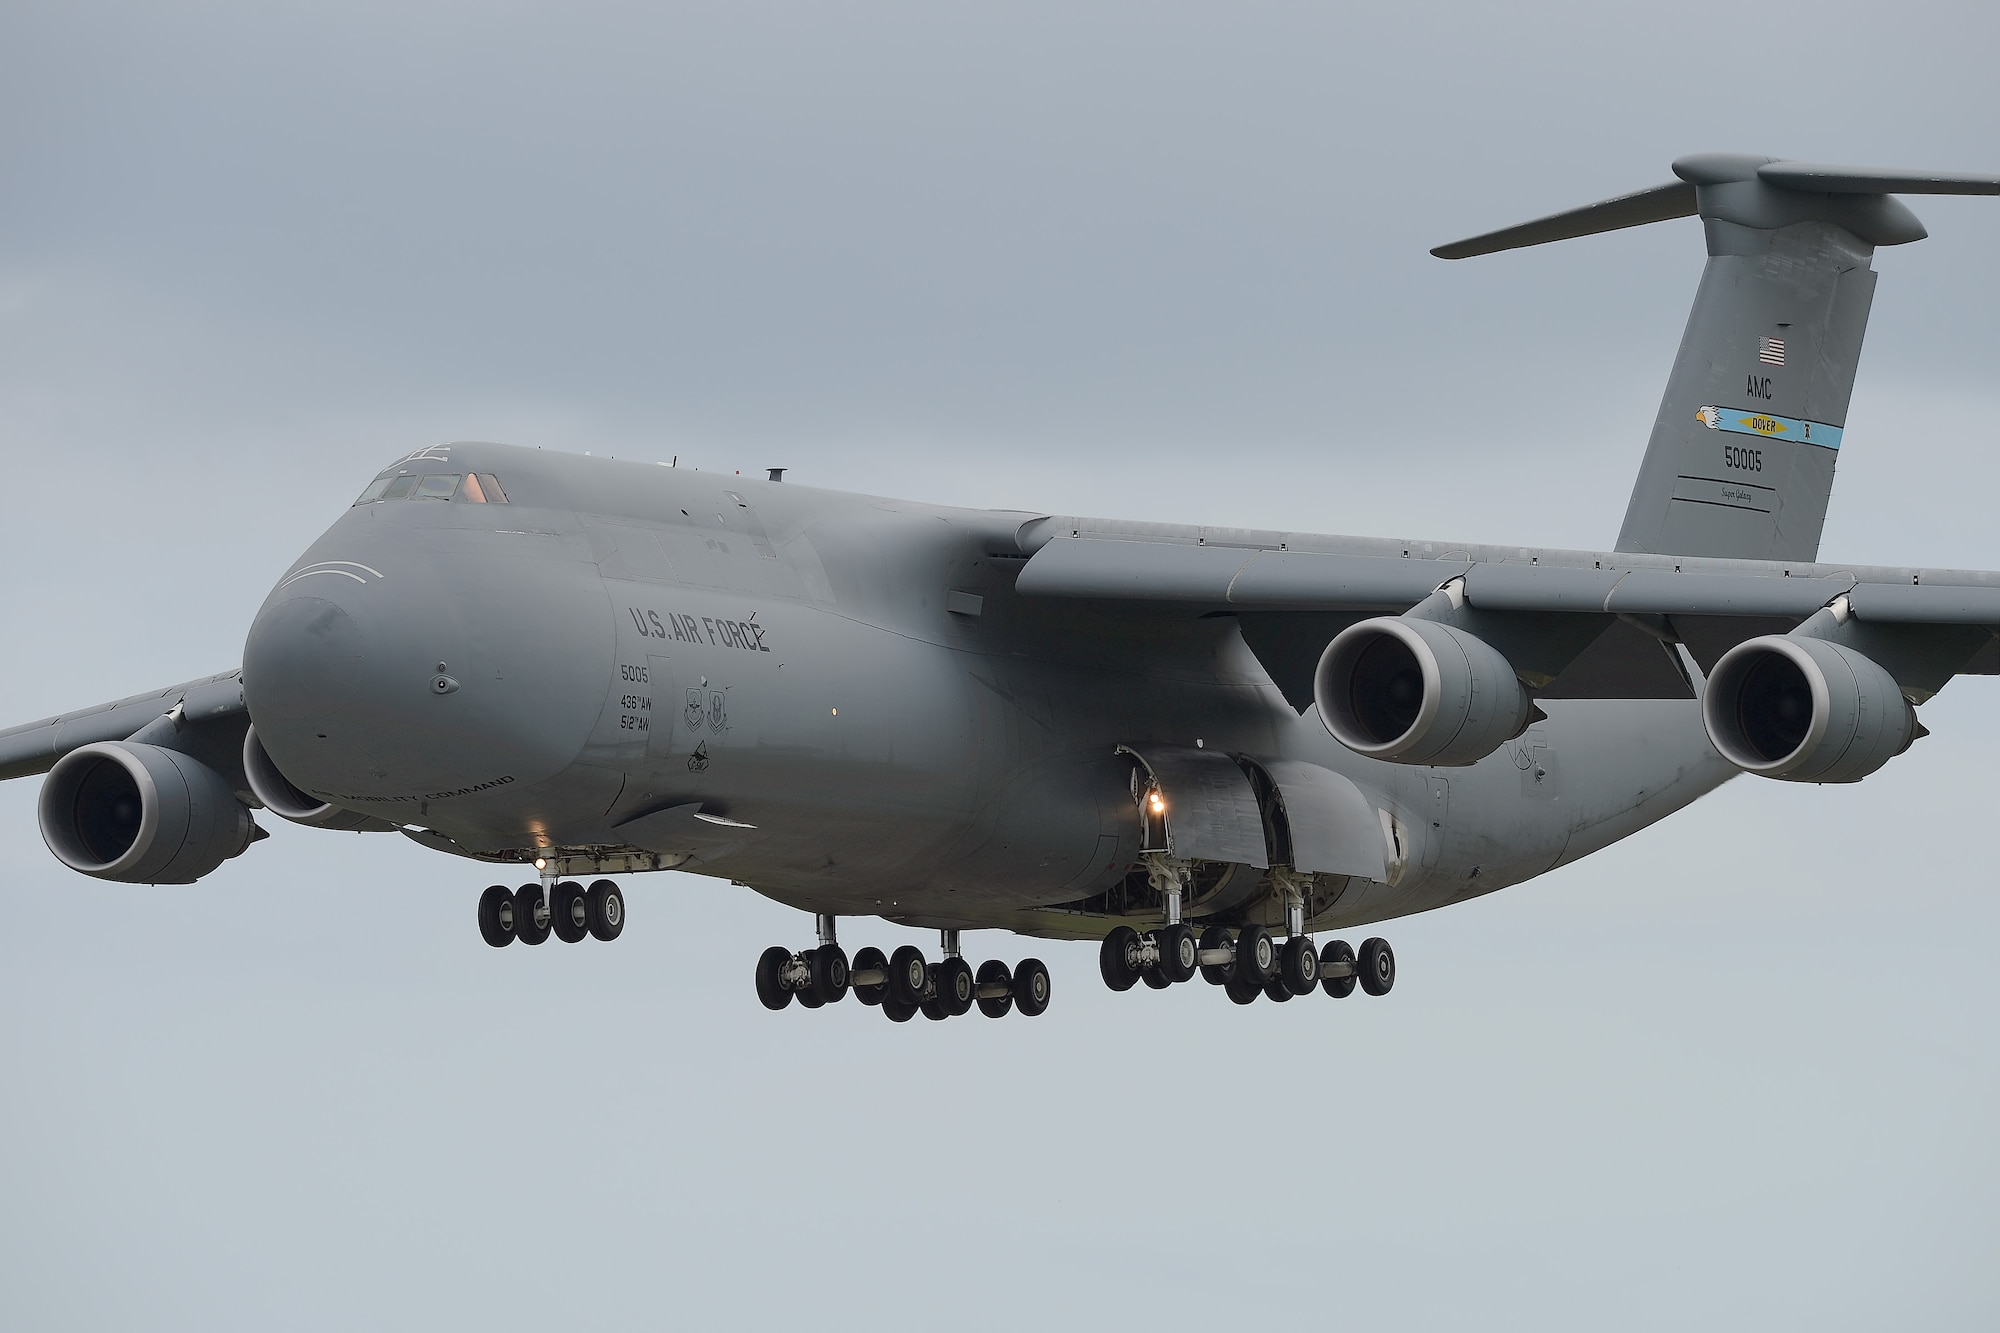 C-5M Super Galaxy, 85-0005, glides in on final approach to Dover Air Force Base, Del., during a training flight. The aircraft is the largest operational aircraft flown by the Air Force and is operated at Dover AFB by the 436th Airlift Wing's 9th Airlift Squadron (U.S. Air Force photo/Greg L. Davis)